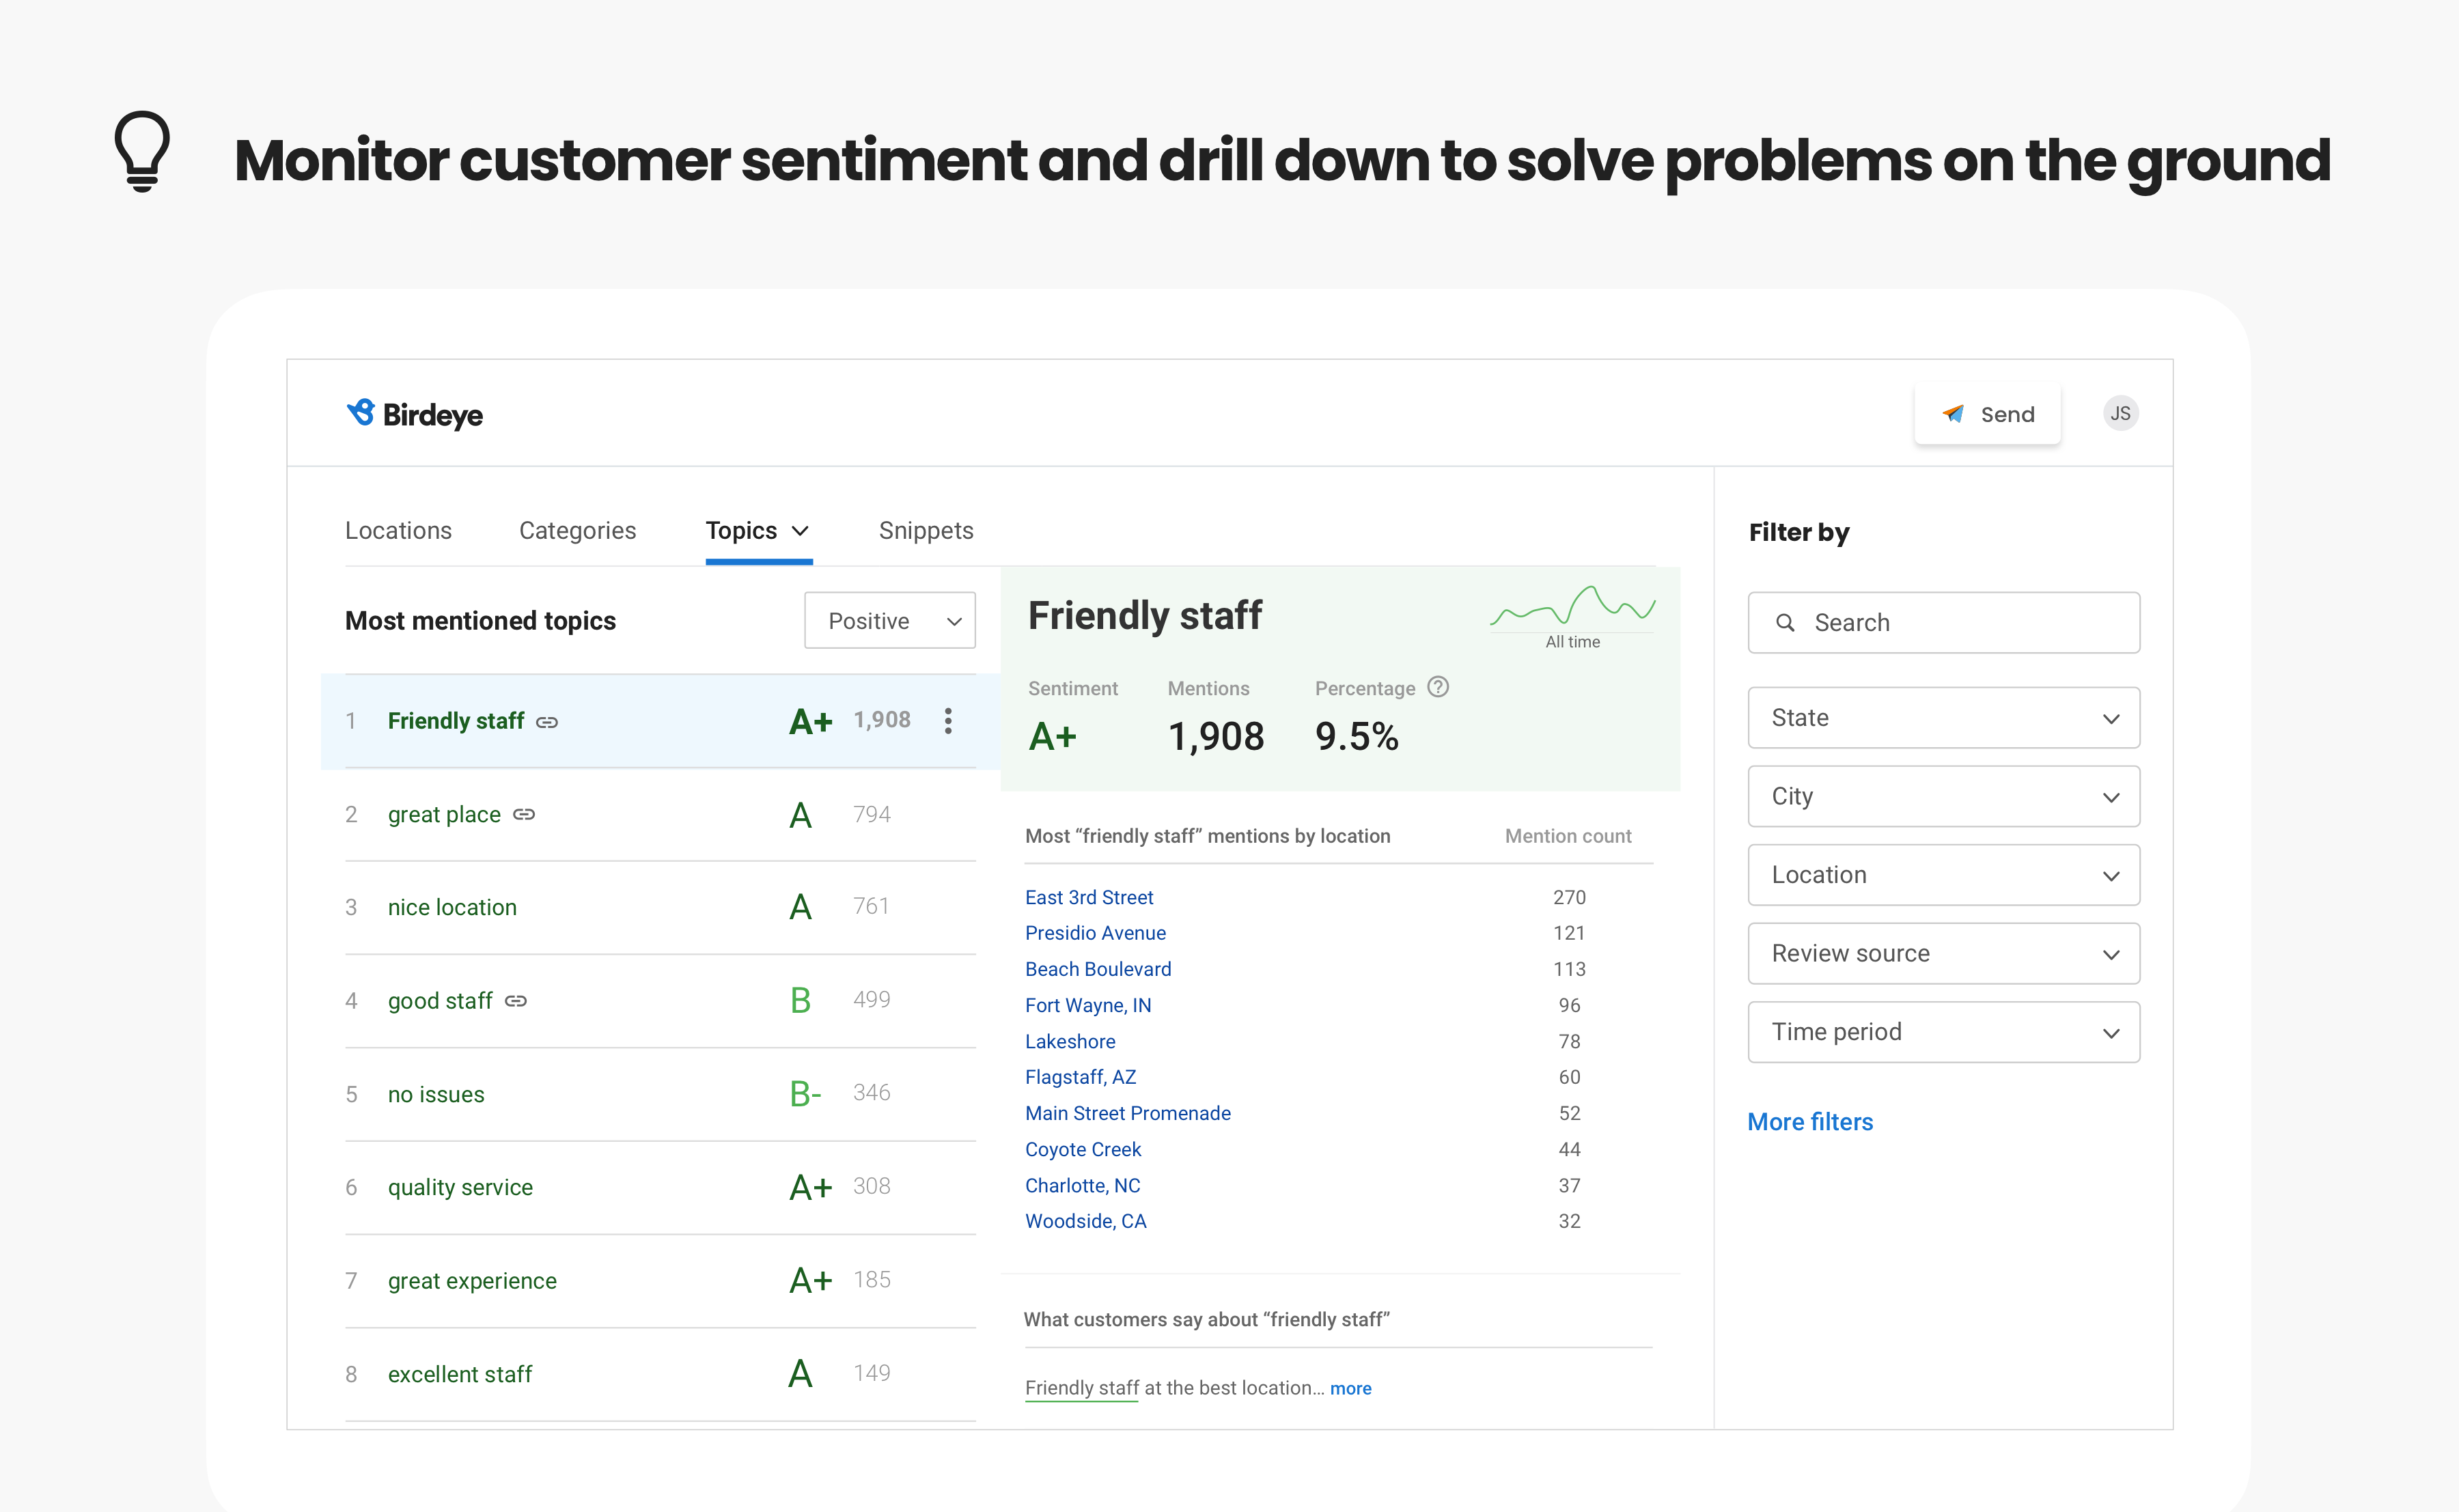 Birdeye Software - Customer sentiment analysis - Monitor customer sentiment and drill down to solve problems on the ground.